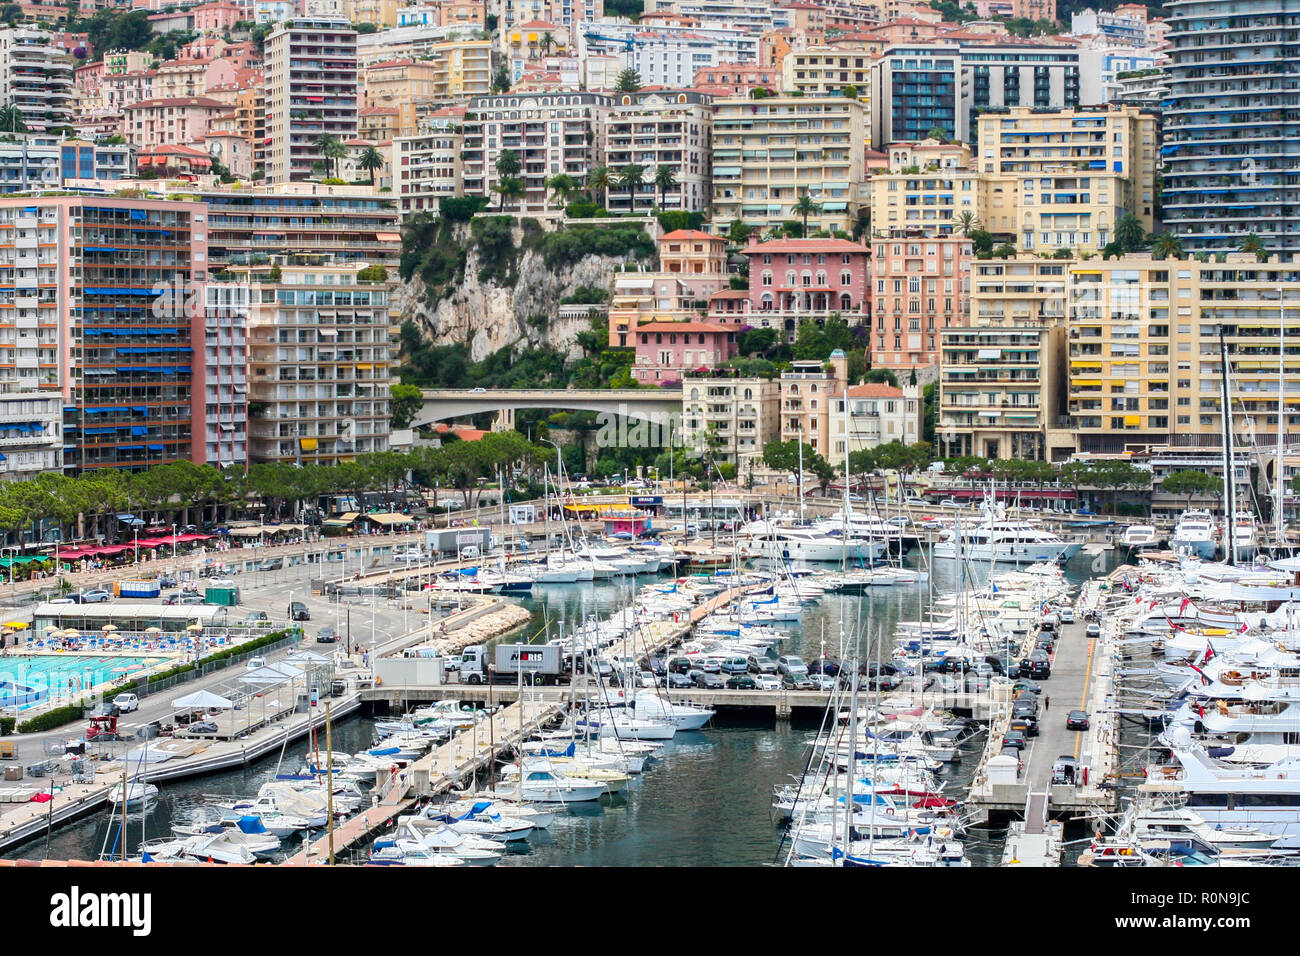 Yachts in Port Hercules Monte Carlo Monaco wealthy concept, built up city living, yacht, boats, super yachts, celebrity lifestyle, rich living, travel Stock Photo